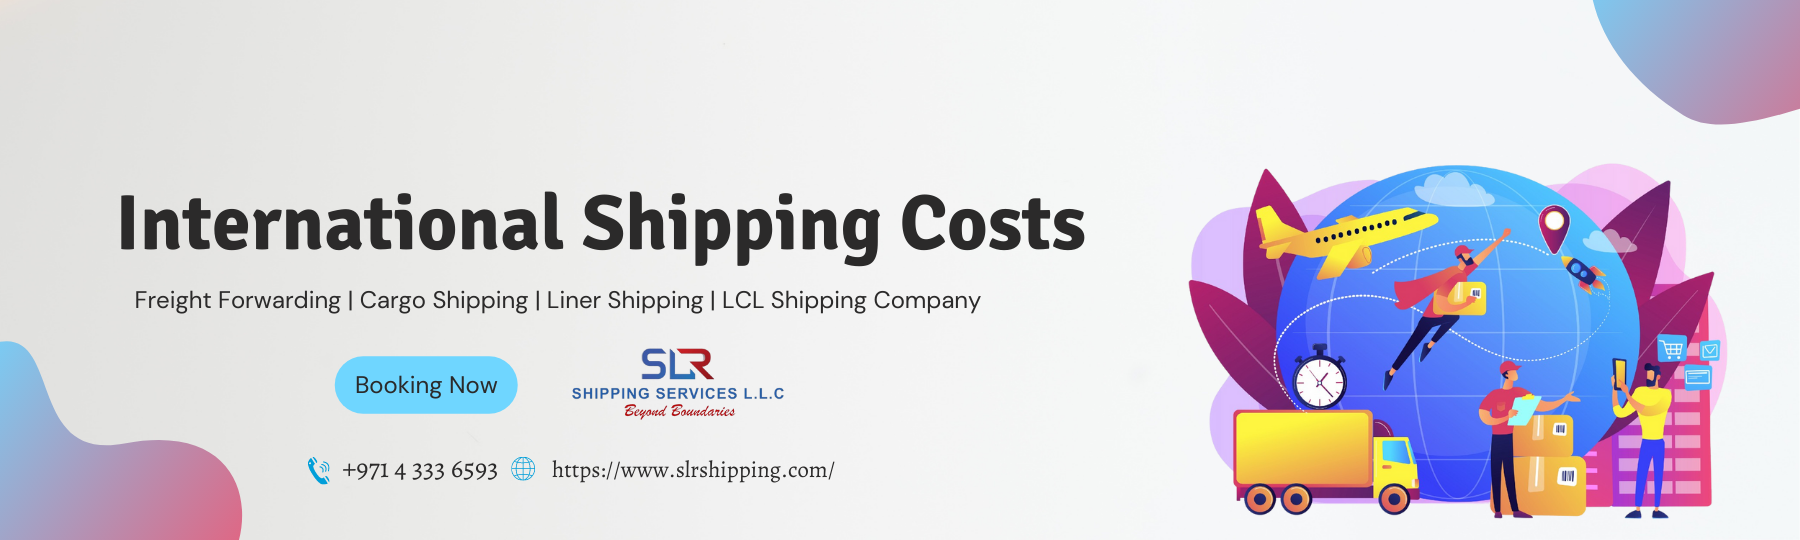 A Complete Guide on International Shipping Costs